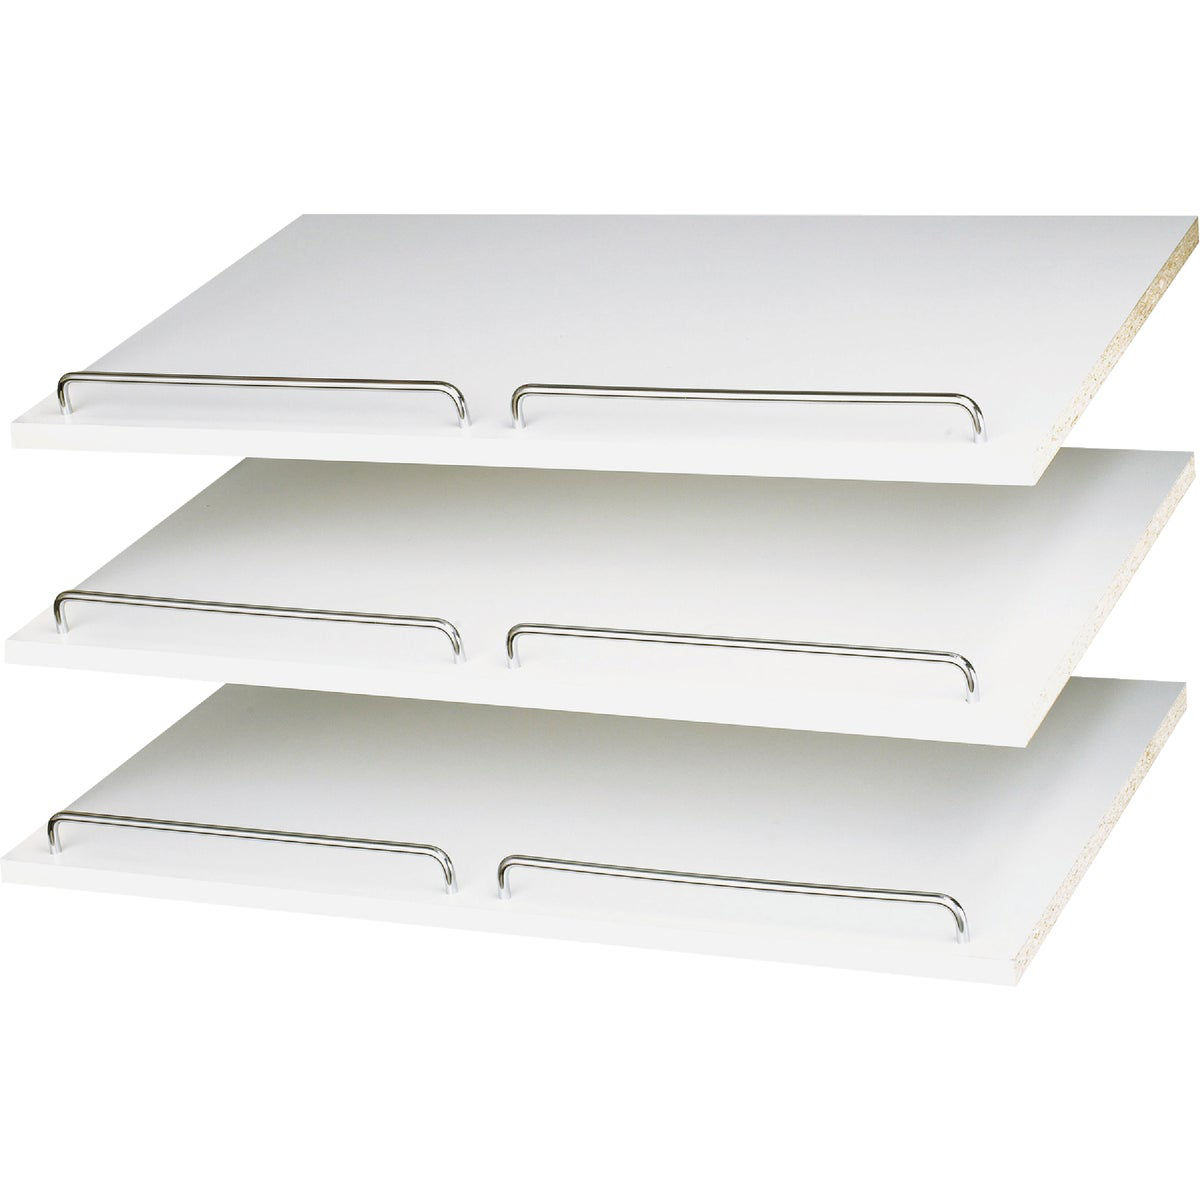 Easy Track 2 Ft. W. x 14 In. D. Laminated Shoe Shelf, White (3-Pack) -  Power Townsend Company